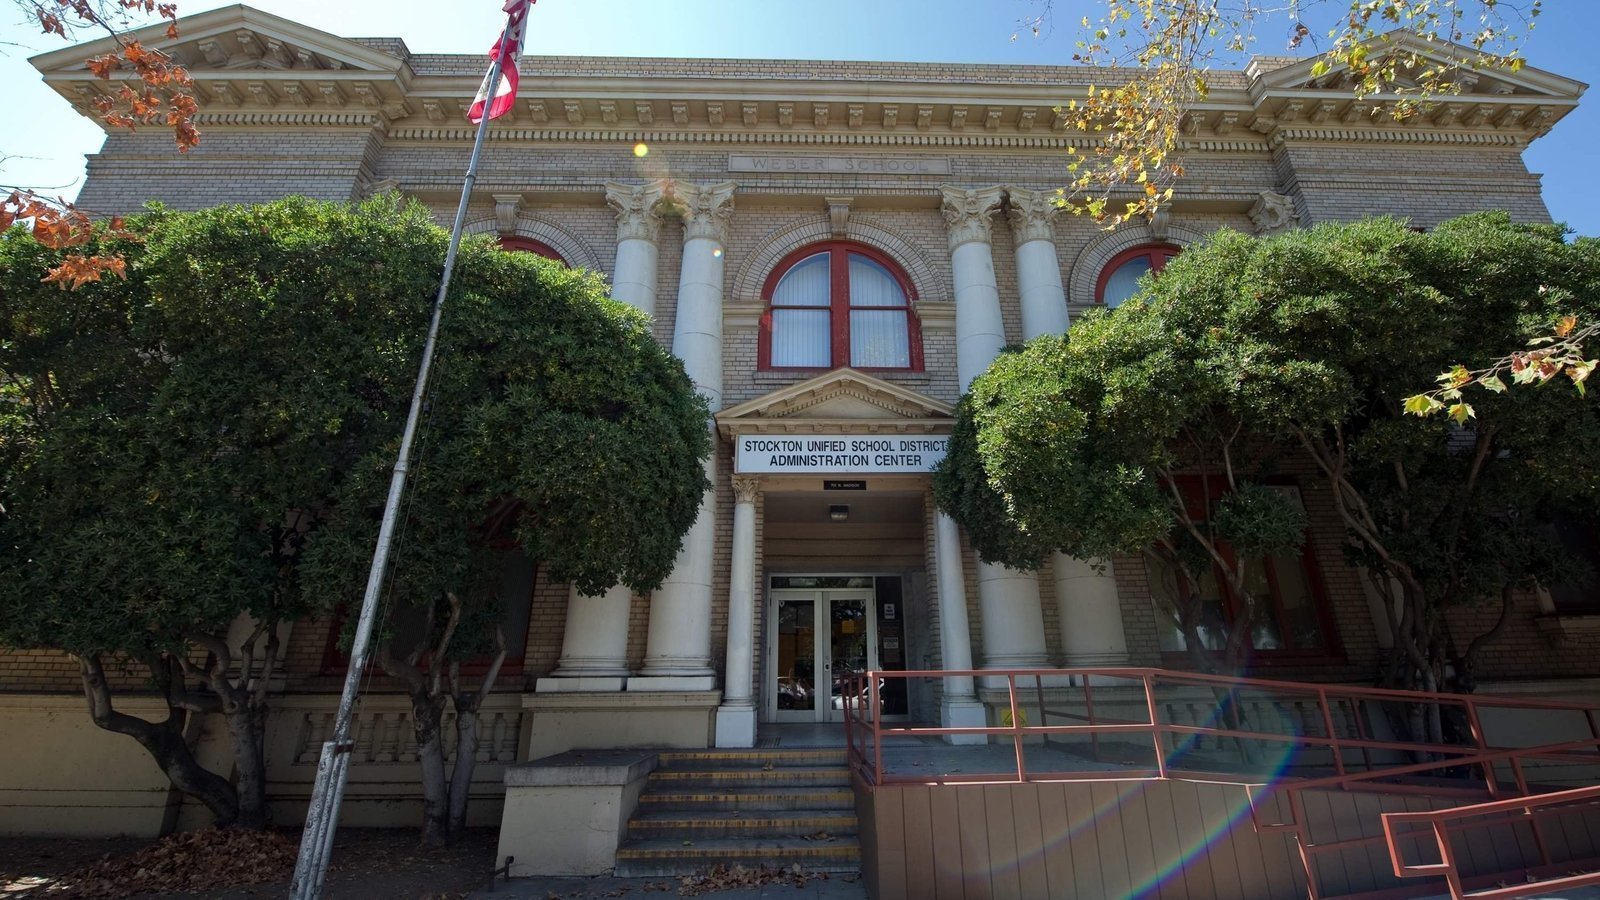 Offices of Stockton Unified School District